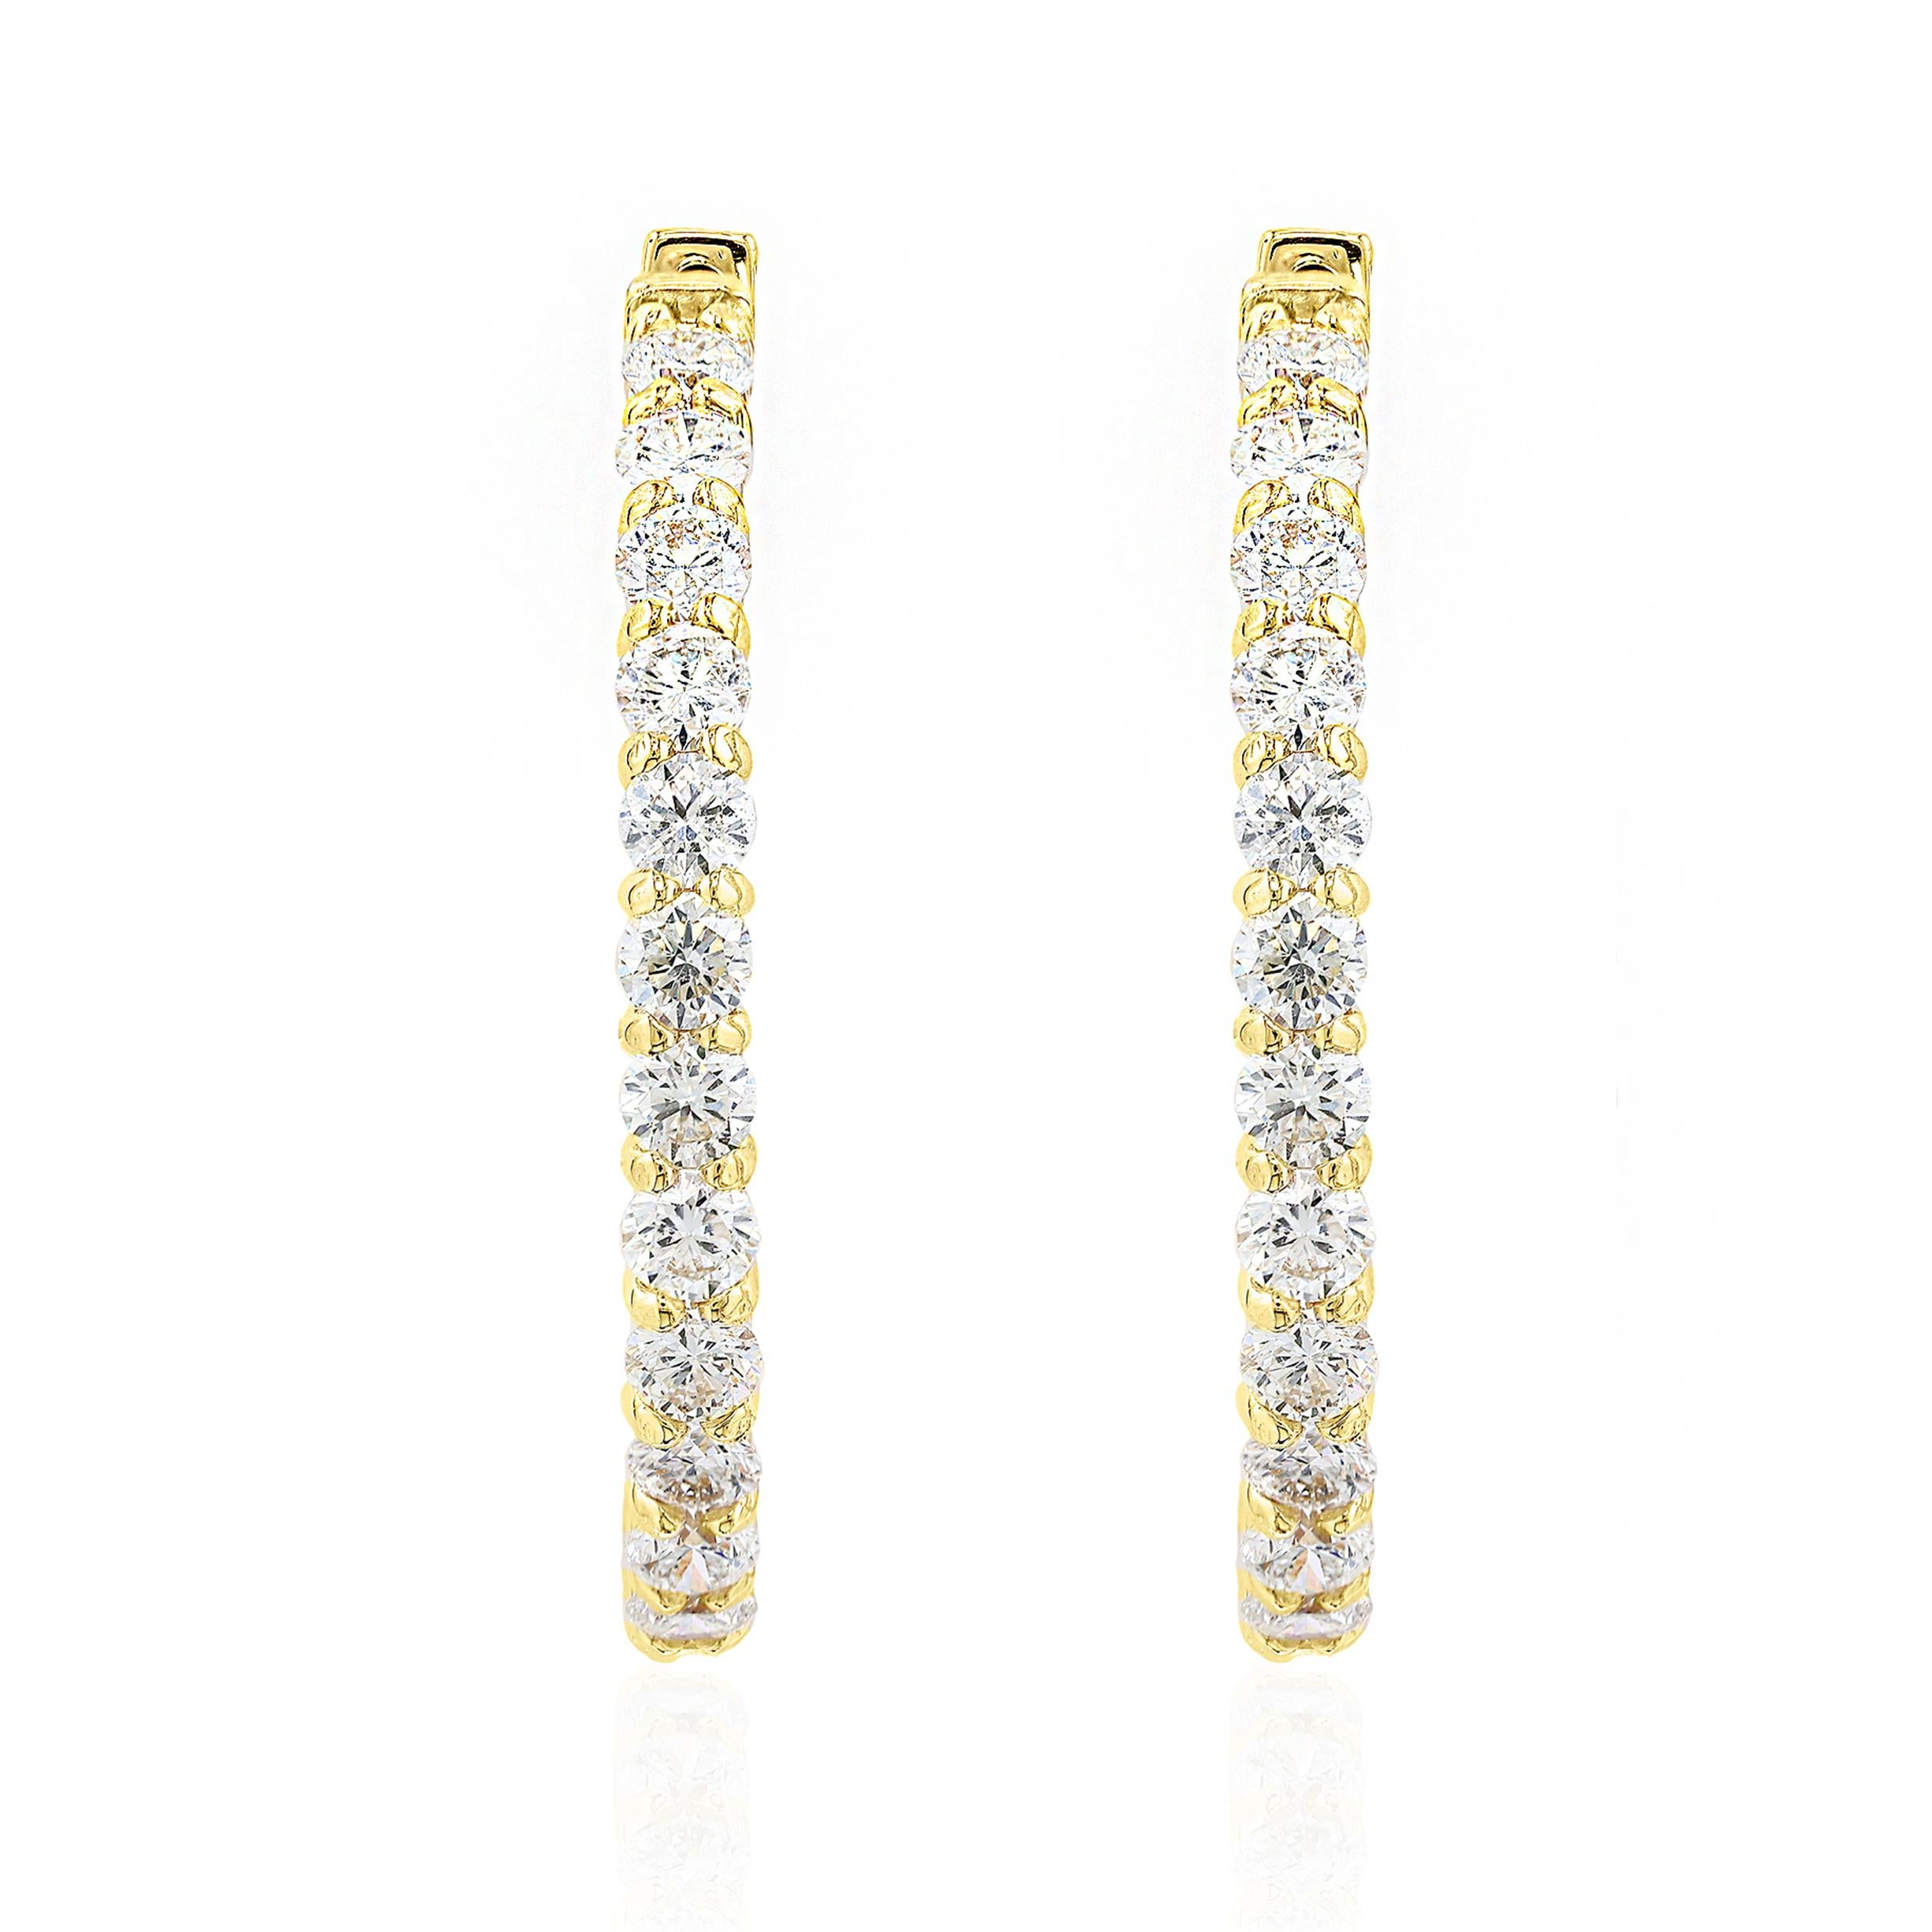 A chic and fashionable pair of hoop earrings showcasing  round diamonds, set in 14k yellow gold.  46 Round diamonds weigh 4.07 carats total. A beautiful piece of jewelry.


All diamonds are GH color SI1 Clarity.
Available in Yellow and Rose Gold as